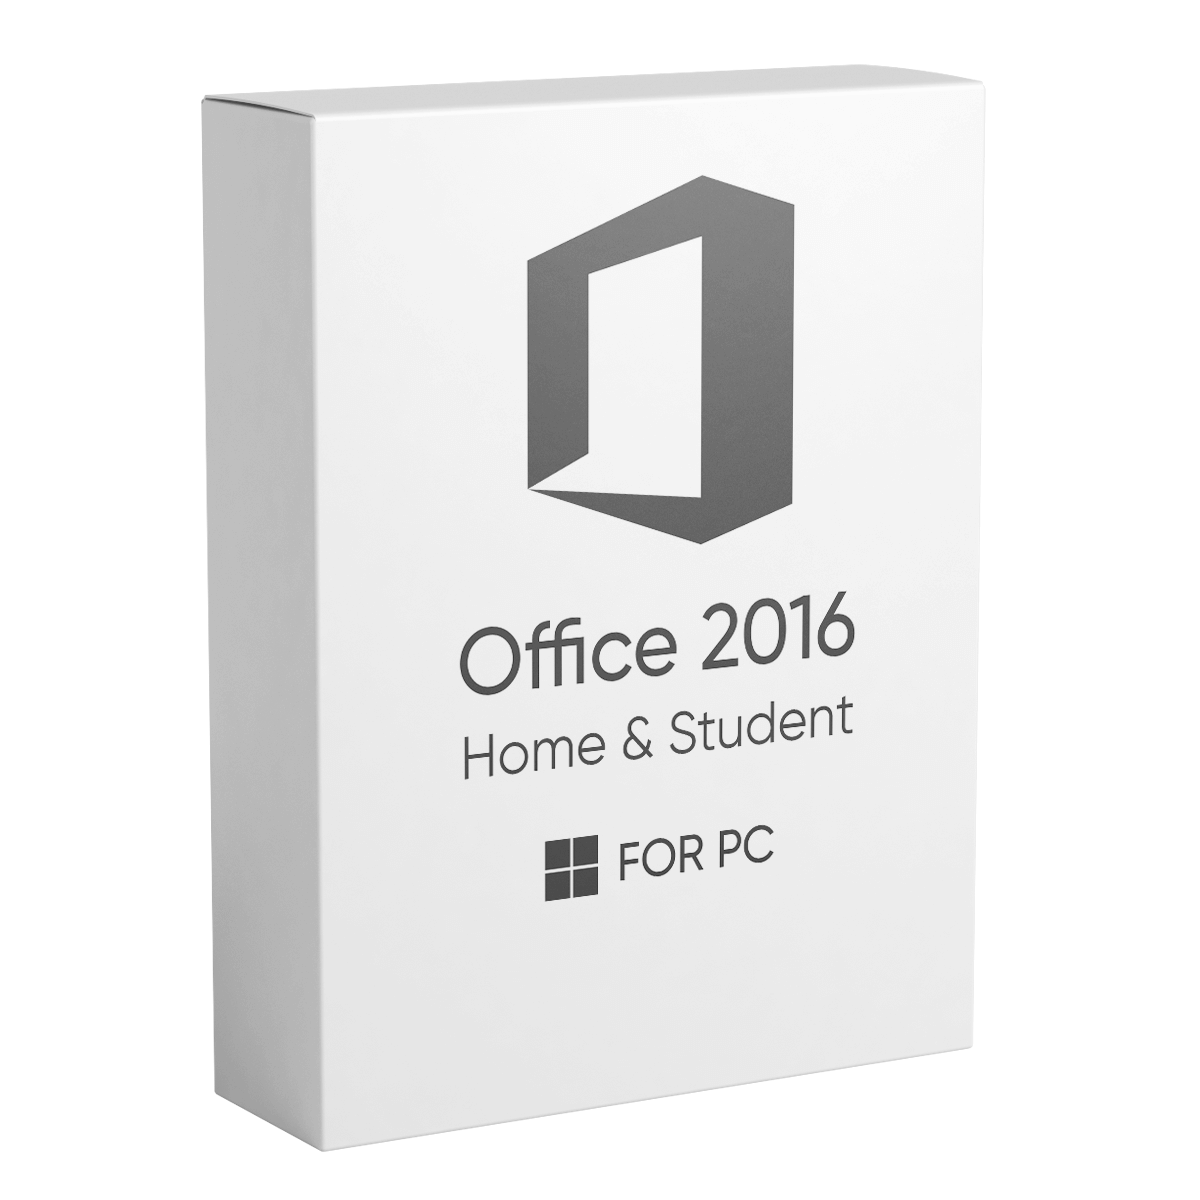 Office 2016 Home and Student for PC - Lifetime License